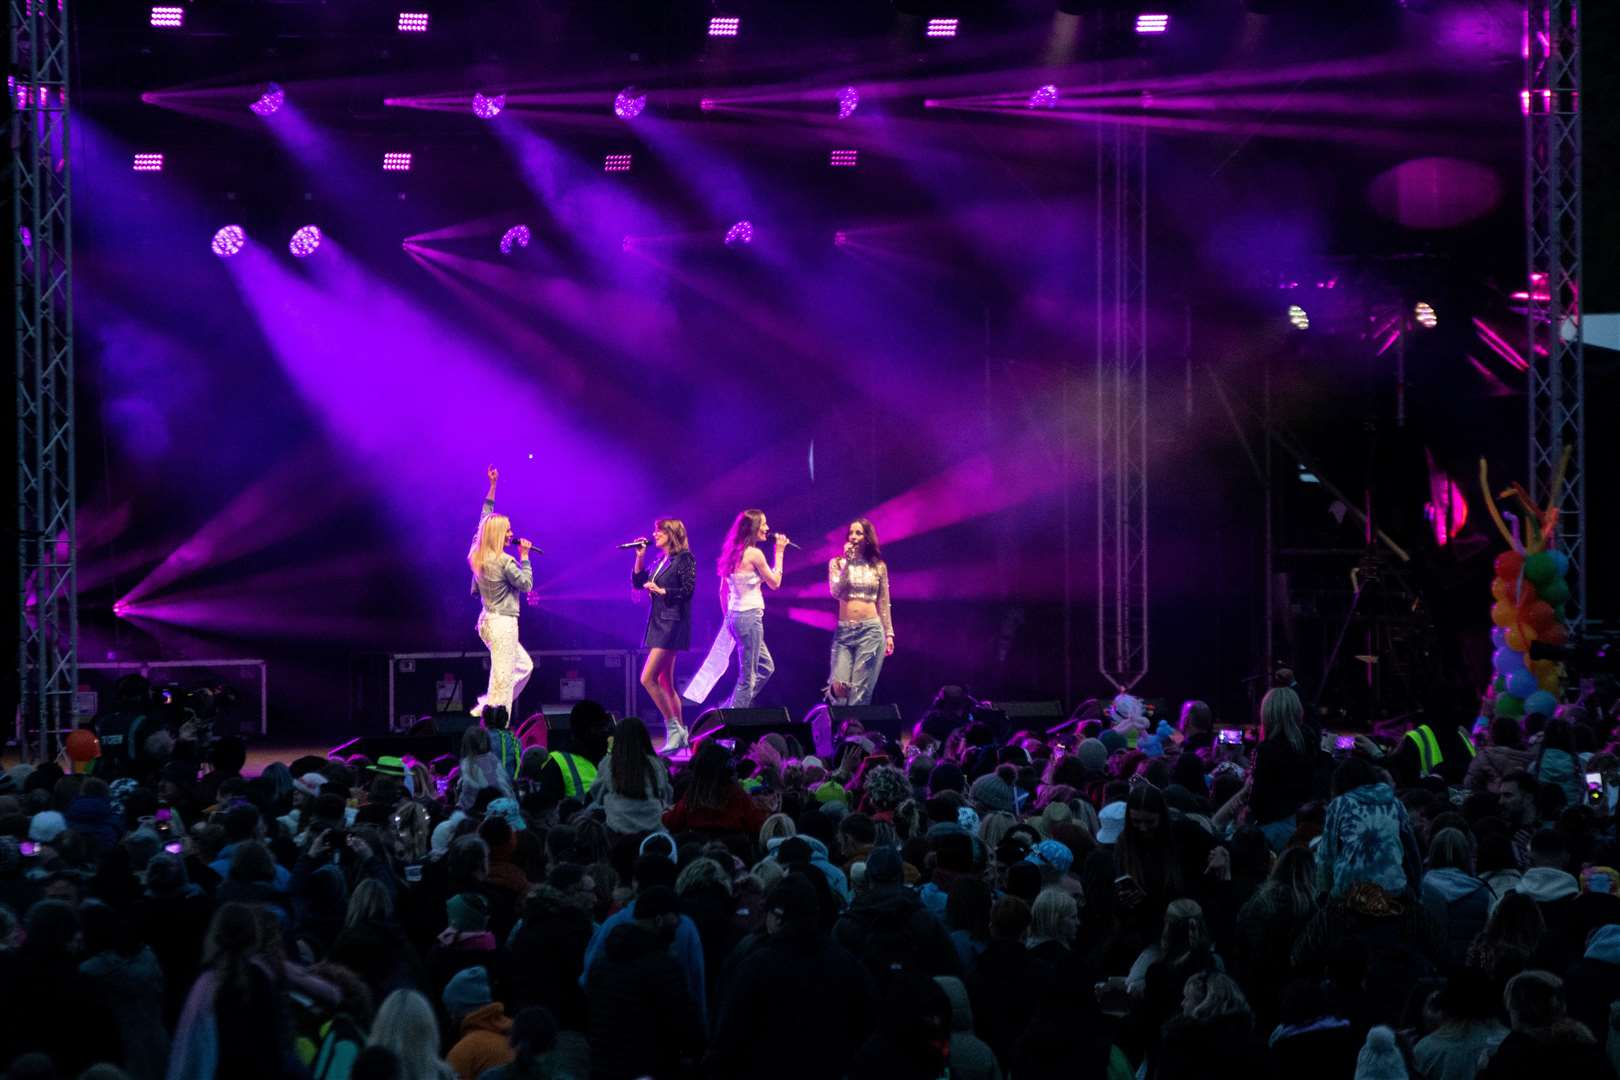 B*Witched were last to perform on the main stage on the Saturday evening.